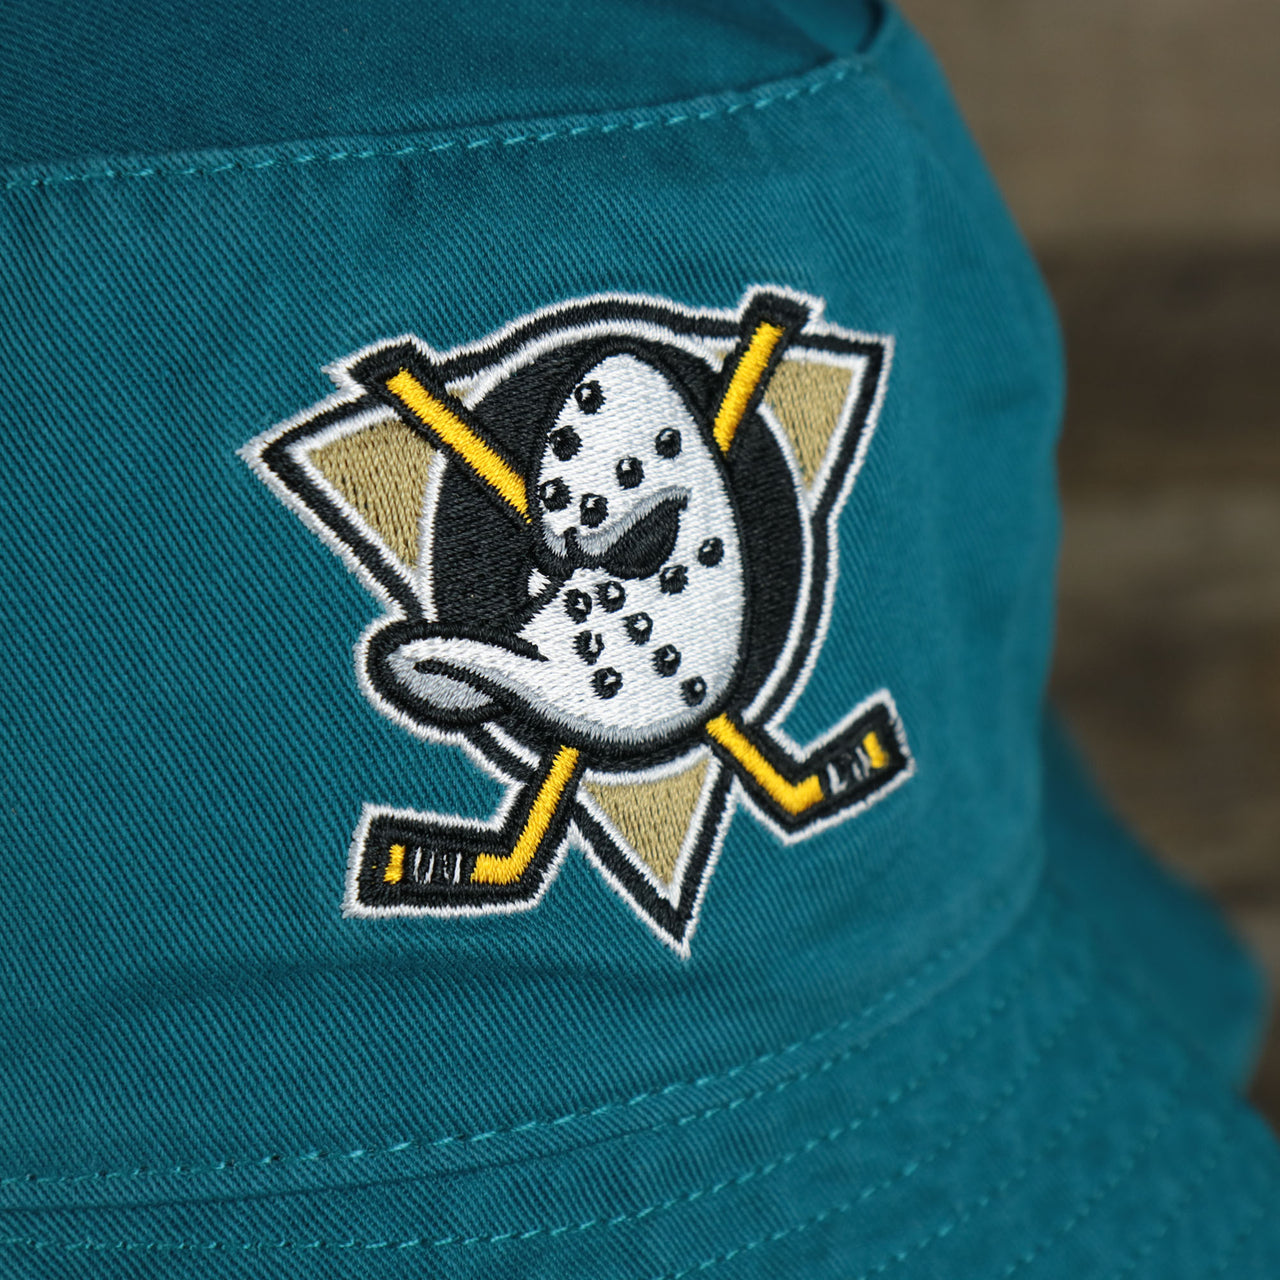 A close up of the Mighty Ducks logo on the Mighty Ducks Vintage 90s Anaheim Ducks Grape 5s Matching Bucket Hat | 47 Brand, Dark Teal